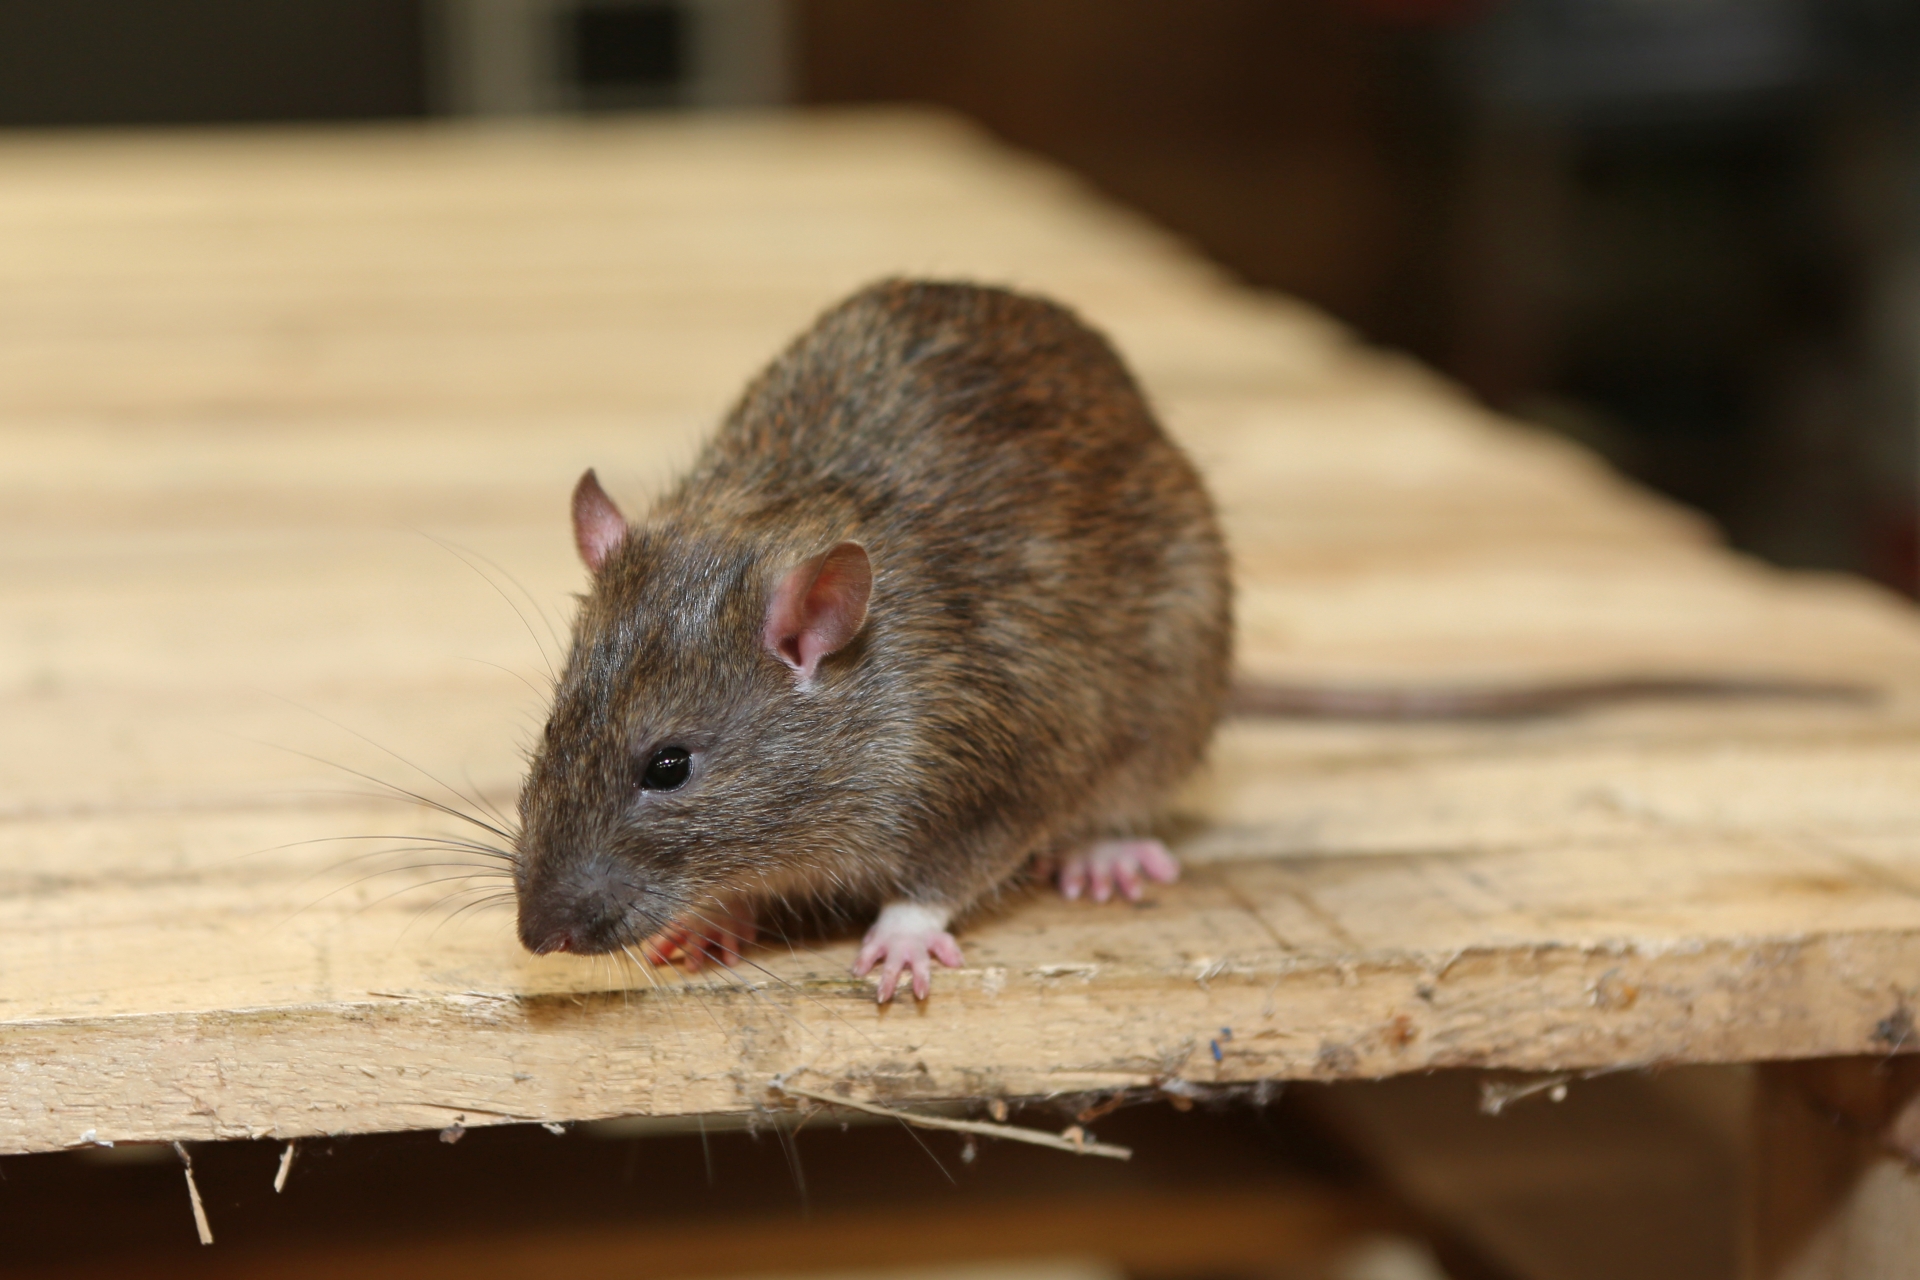 Rat Infestation, Pest Control in Battersea, SW11 . Call Now 020 8166 9746